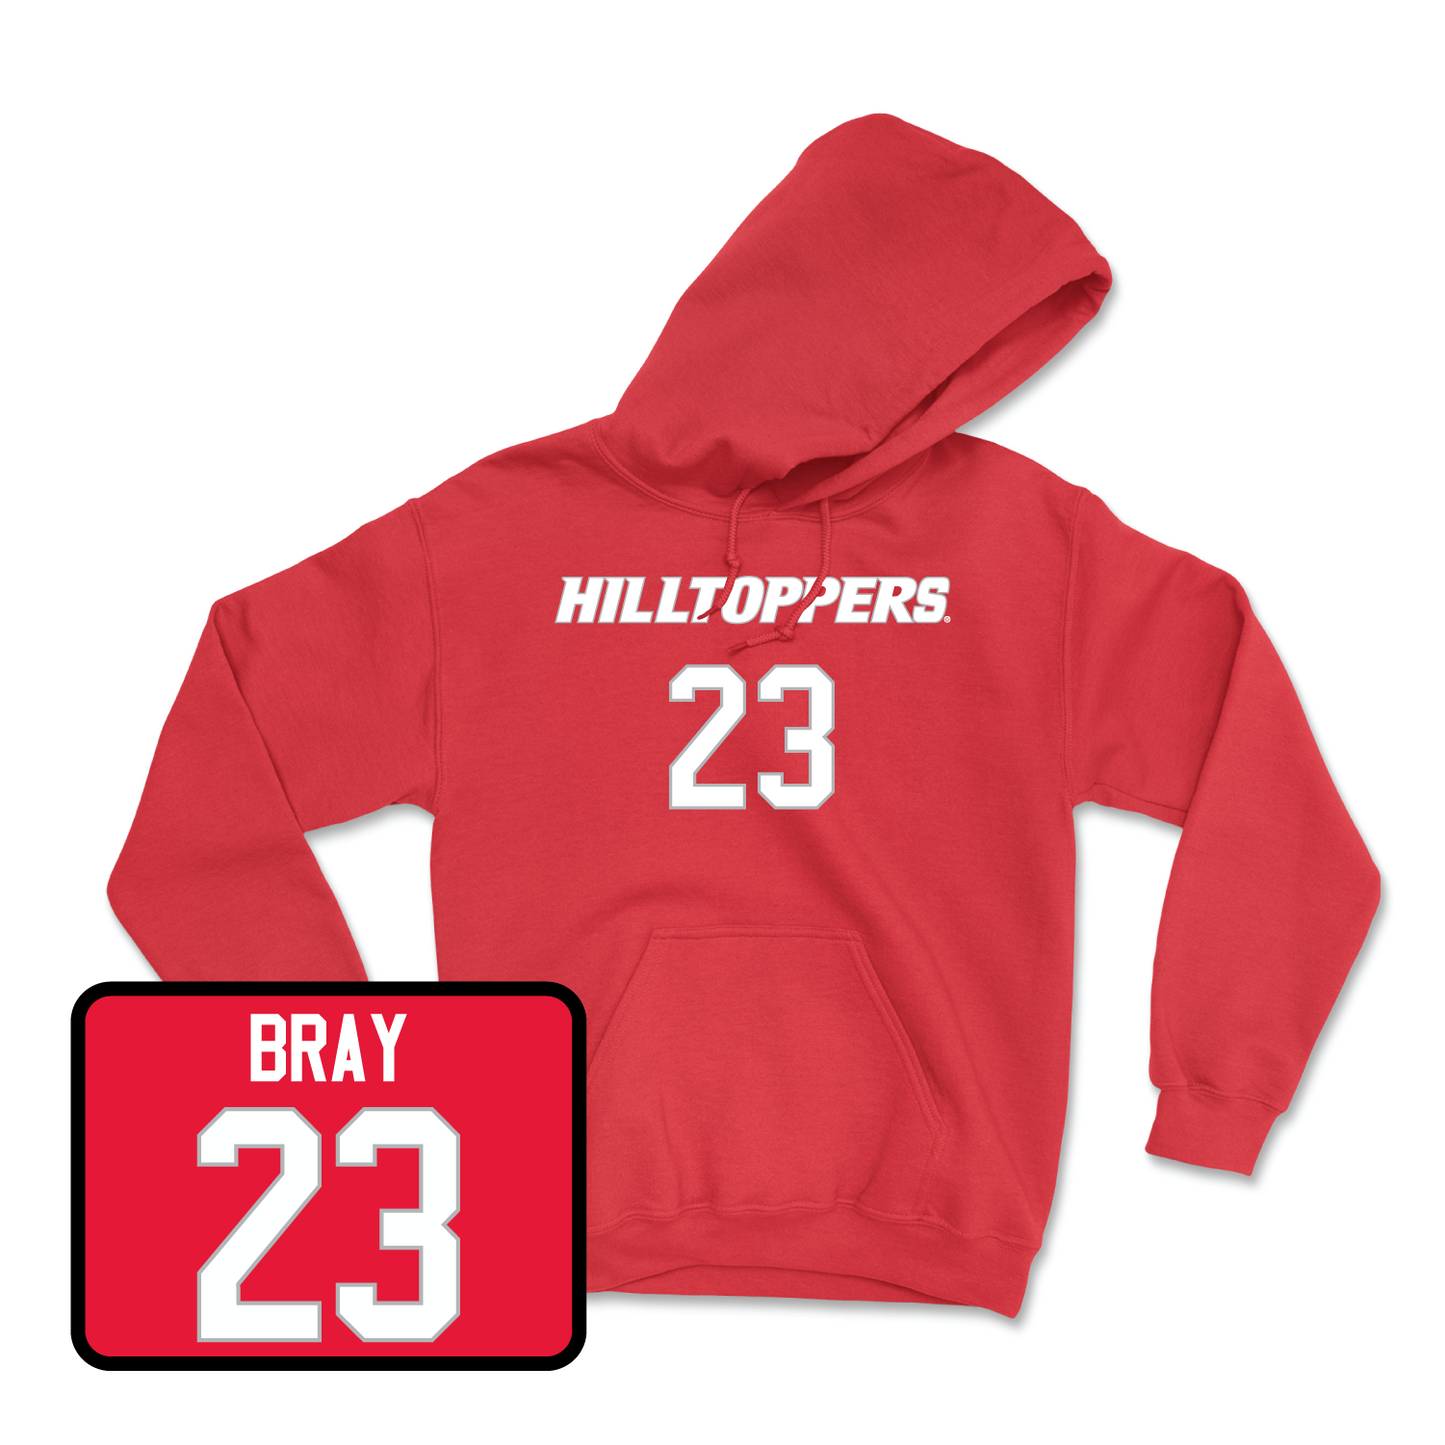 Red Softball Hilltoppers Player Hoodie